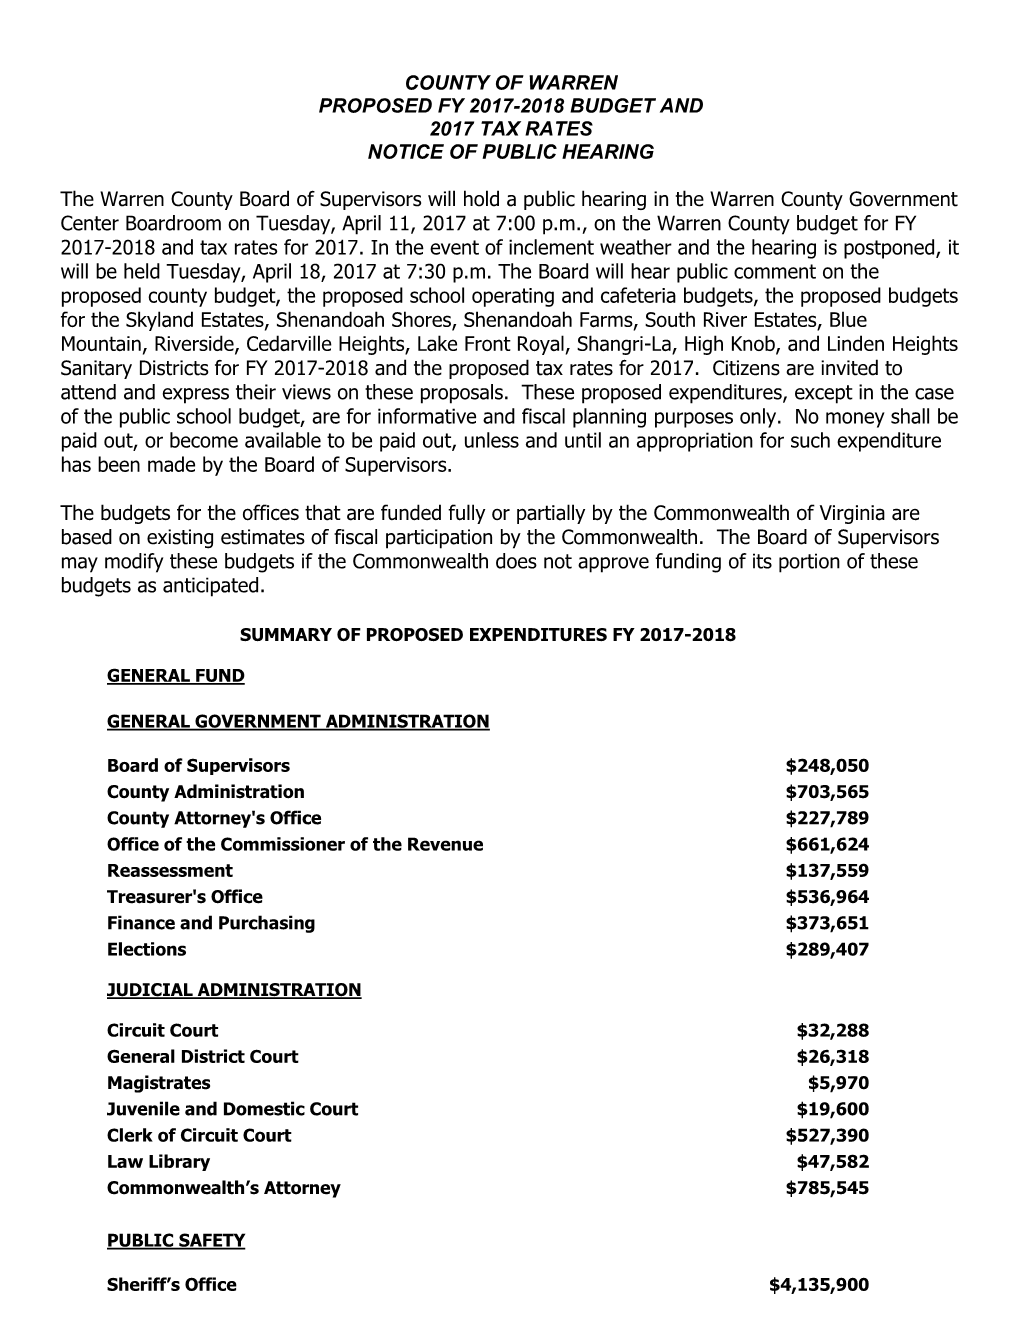 County of Warren Proposed Fy 2017-2018 Budget and 2017 Tax Rates Notice of Public Hearing